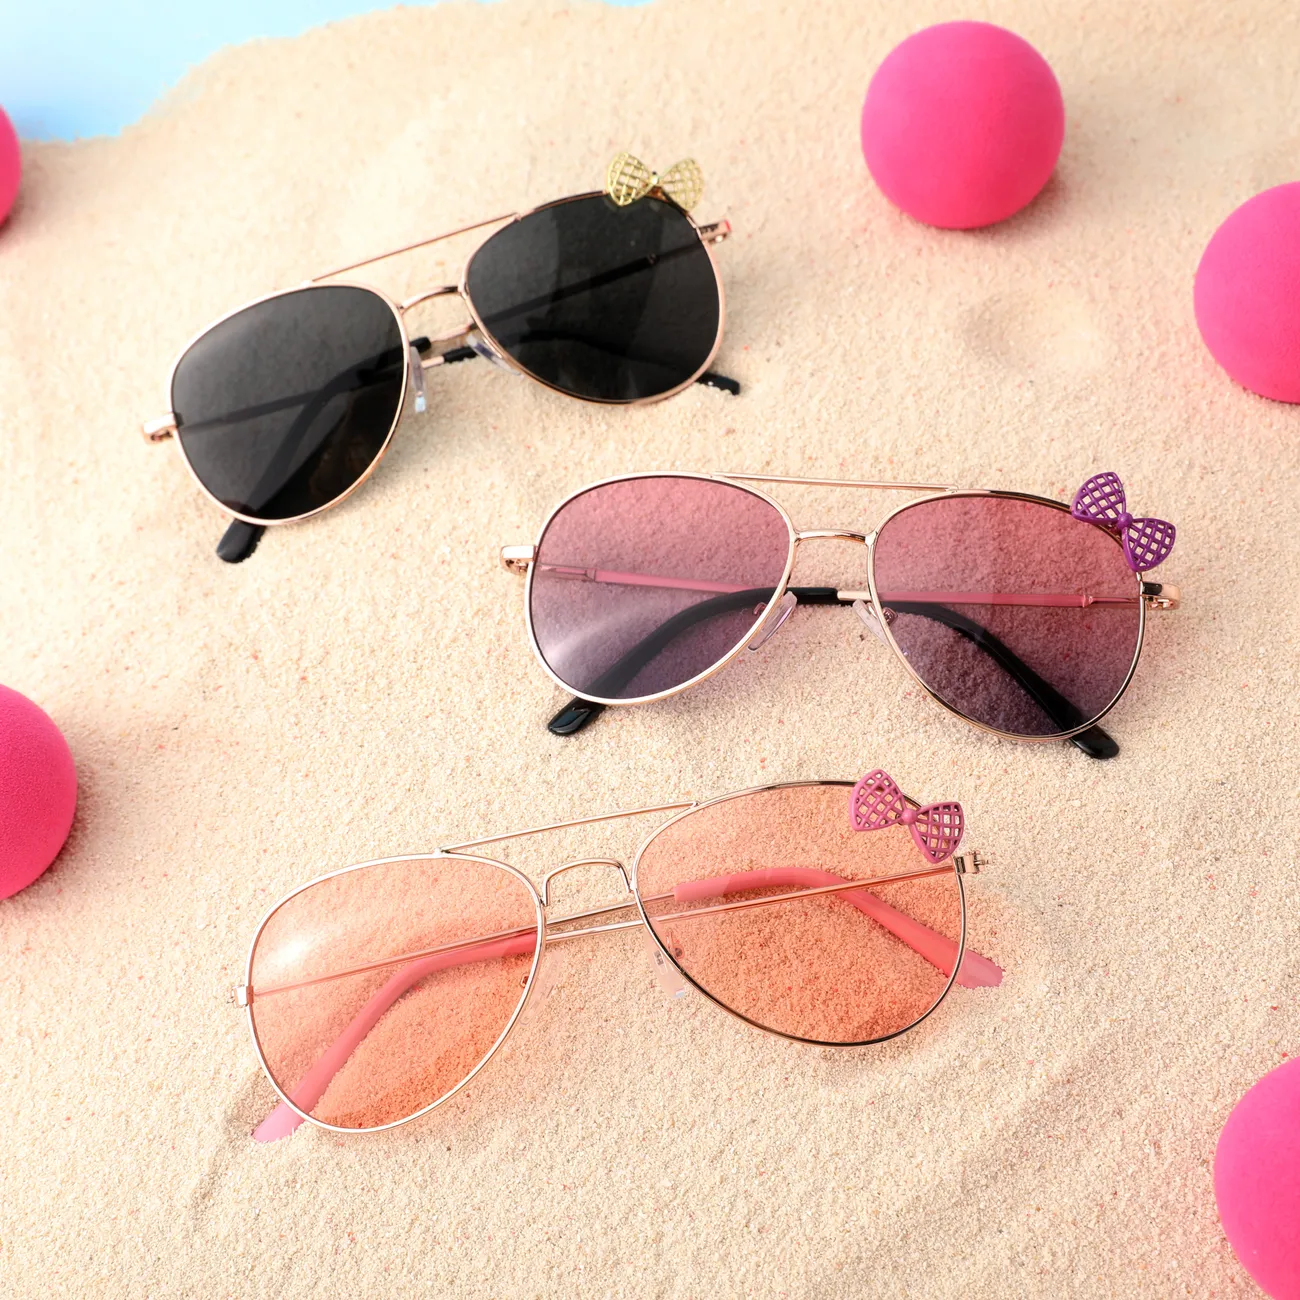 Toddler/kids Girl Sweet Sunglasses with Metal Frame and Decorative Bow-Tie Cat-Eye Lenses Pink big image 1